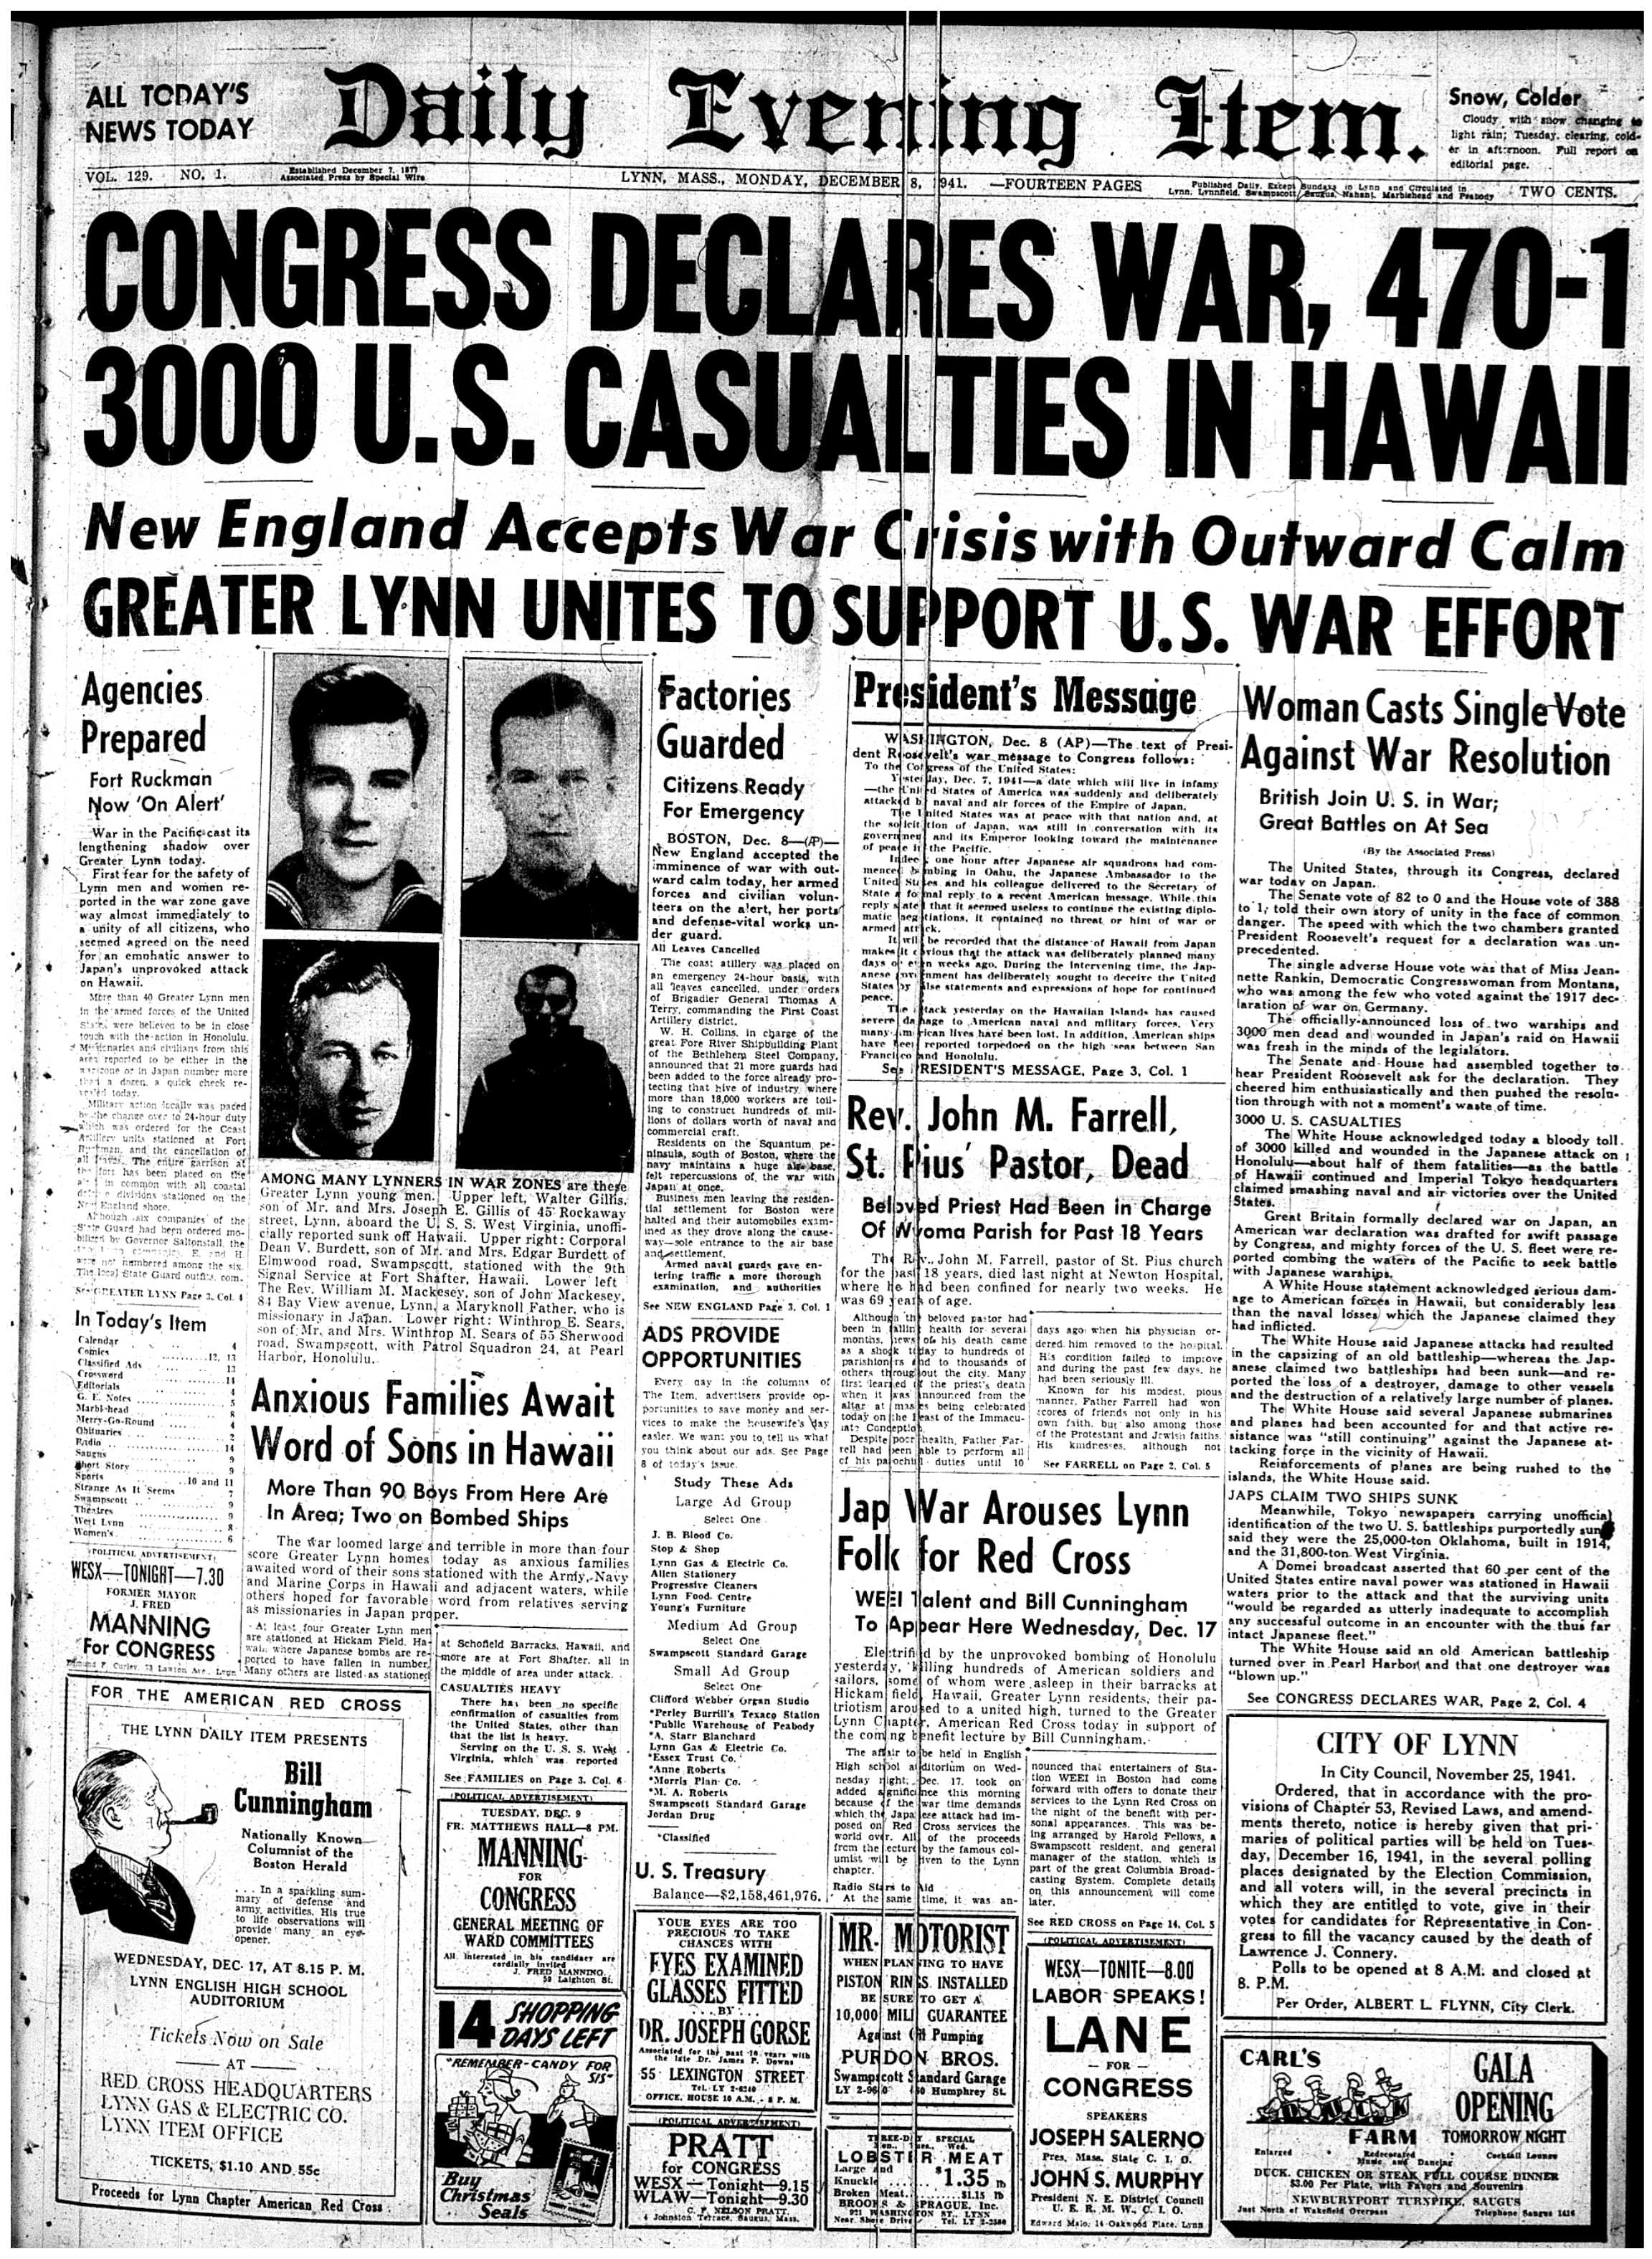 Here's how North Shore readers learned about Pearl Harbor 76 years ago ...